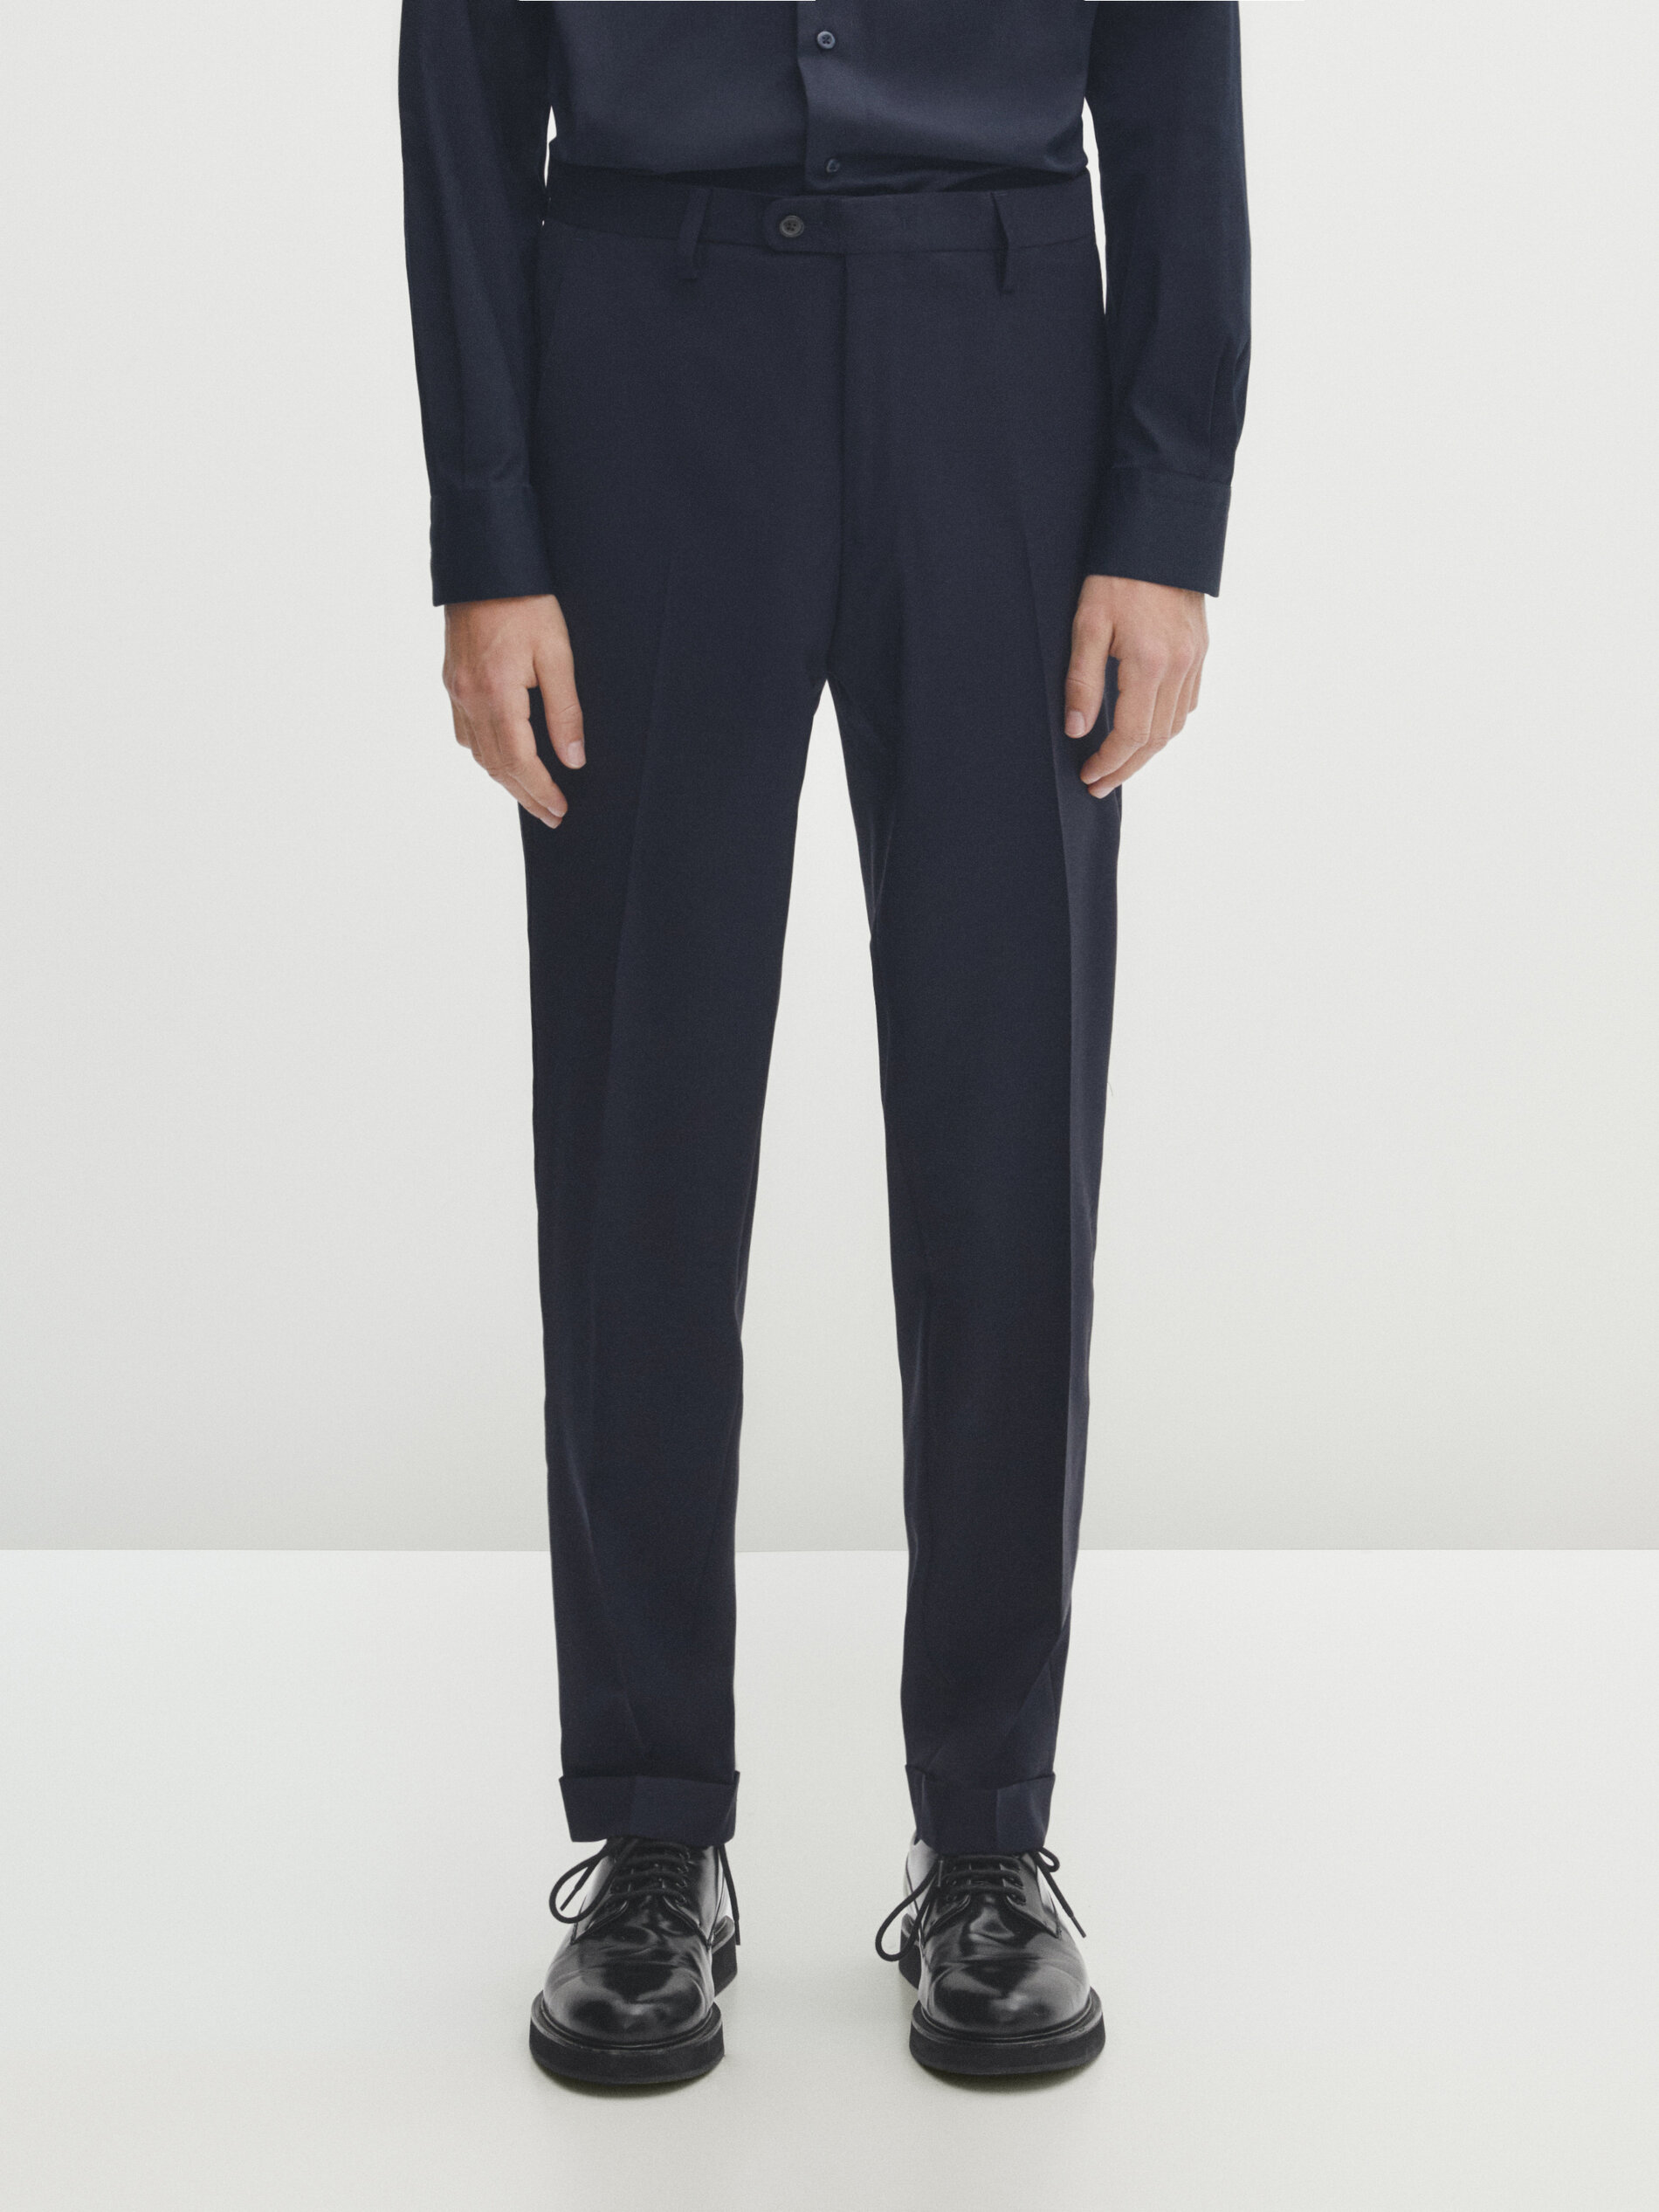 Slim Fit Navy Tuxedo Trousers | Buy Online at Moss